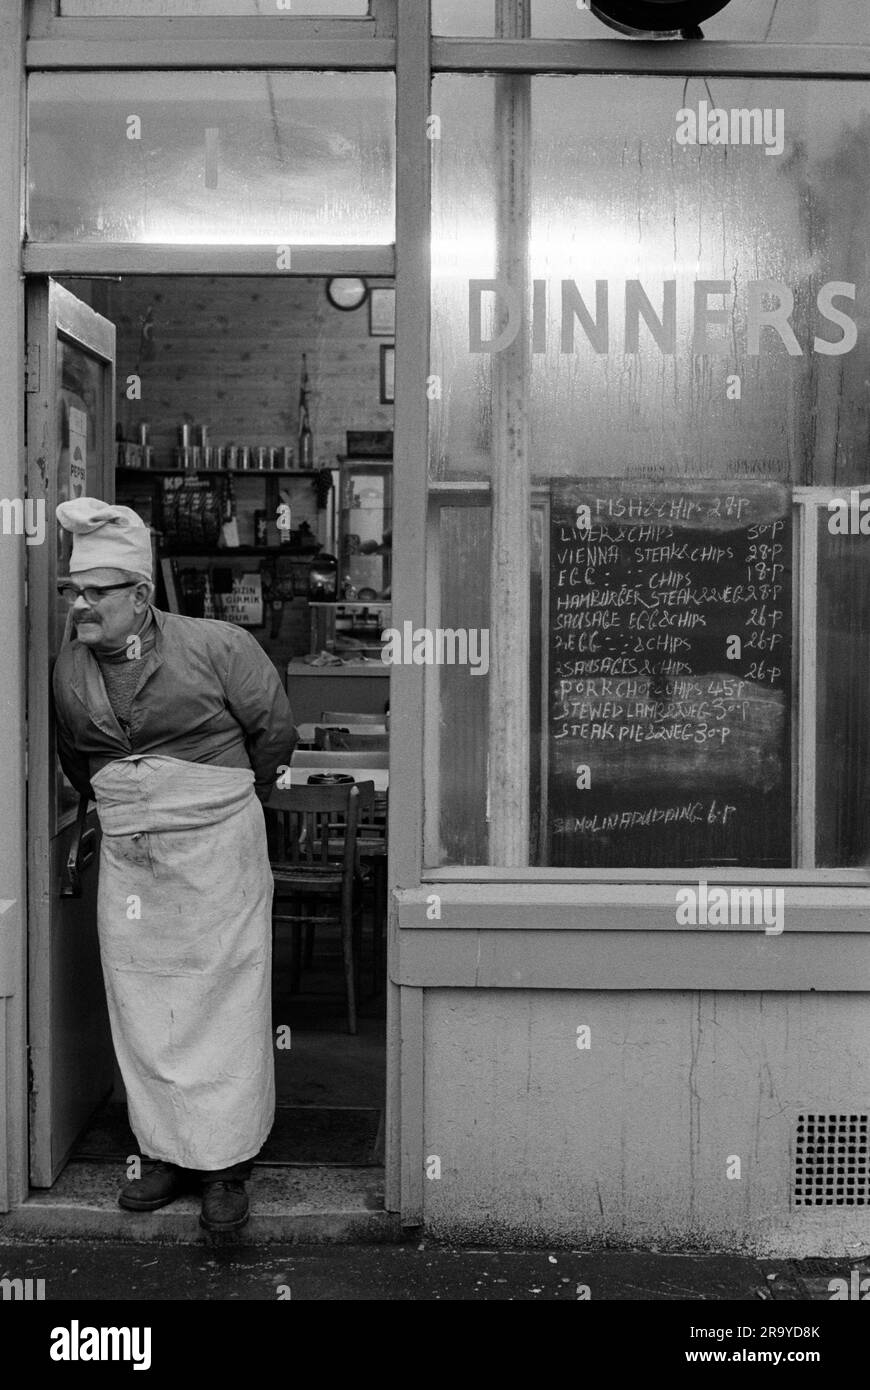 Brick Lane London 1970s. The proprietor in chefs hat and apron, buttoned up to his jacket, stands outside his greasy spoon Dinners café in Brick Lane waiting for lunchtime customers. The blackboard dinner menu is almost everything with chips. Whitechapel, London, England 1974. 70s UK HOMER SYKES Stock Photo